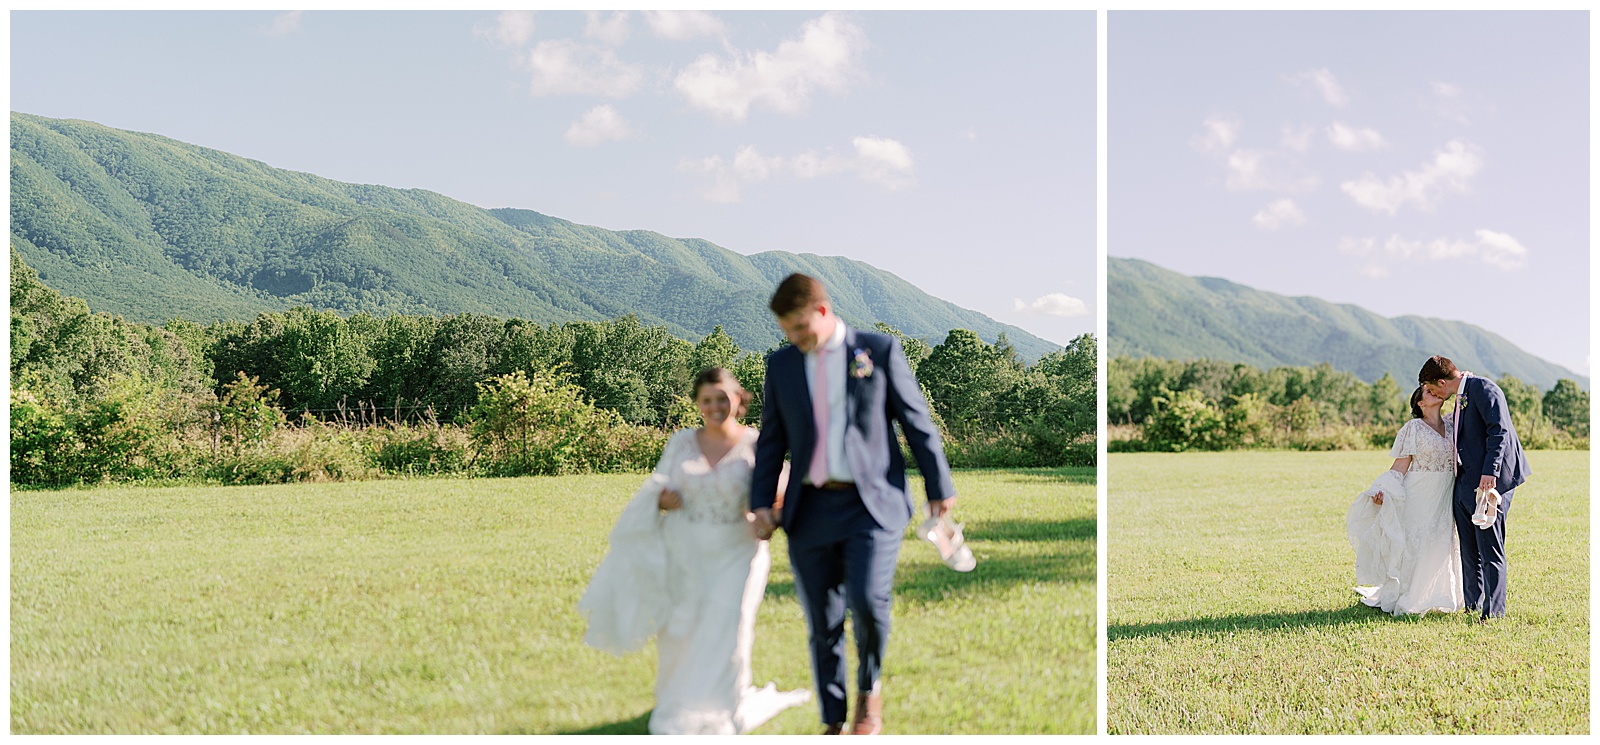 Film wedding photographer in East Tennessee & South Carolina - Holly Michon Photography